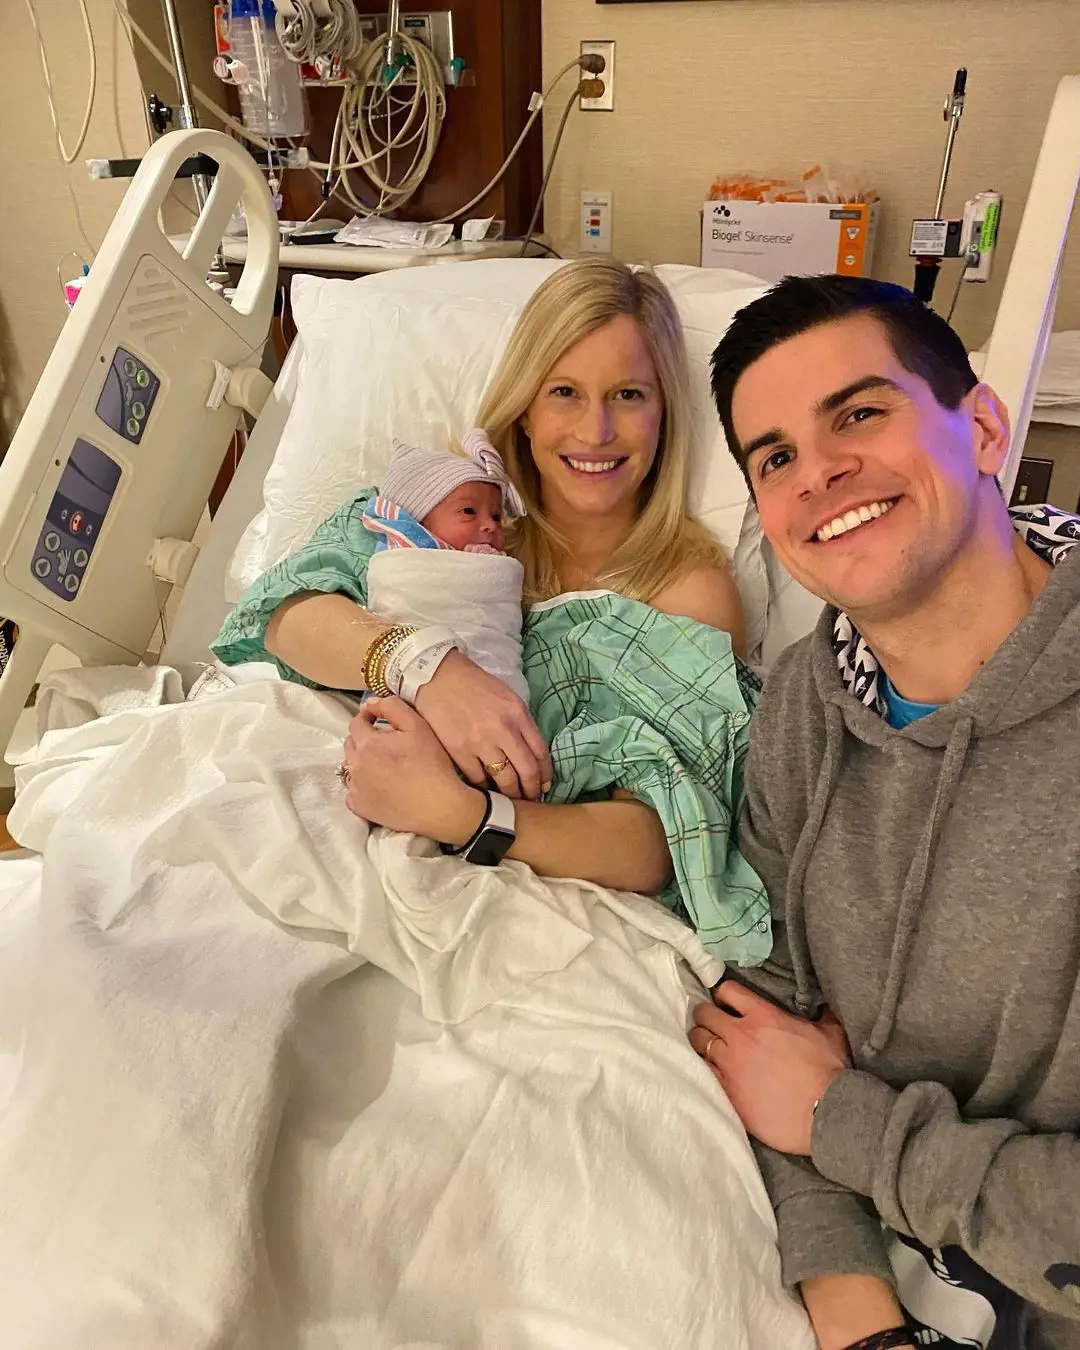 Field and Chapin welcomed their little bundle of joy in 2022 